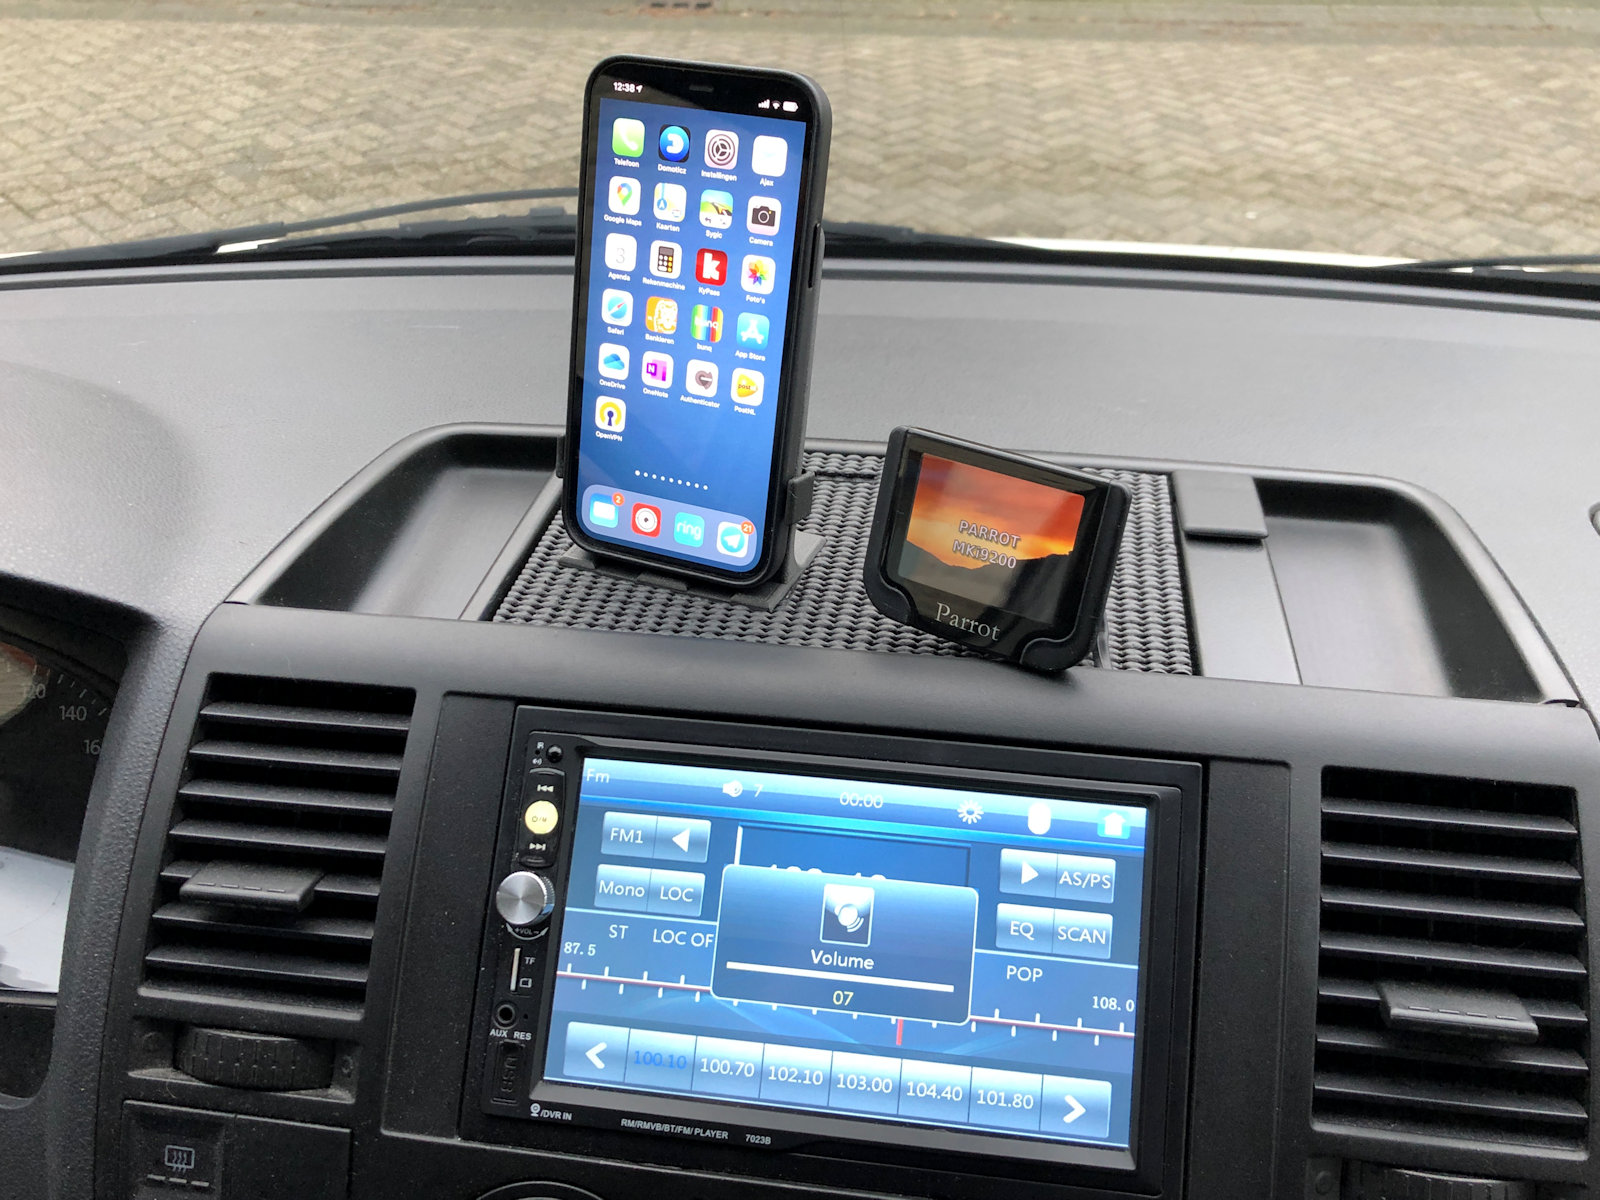 VW T5 Dashboard iPhone 12 Pro holder with MagSafe charger